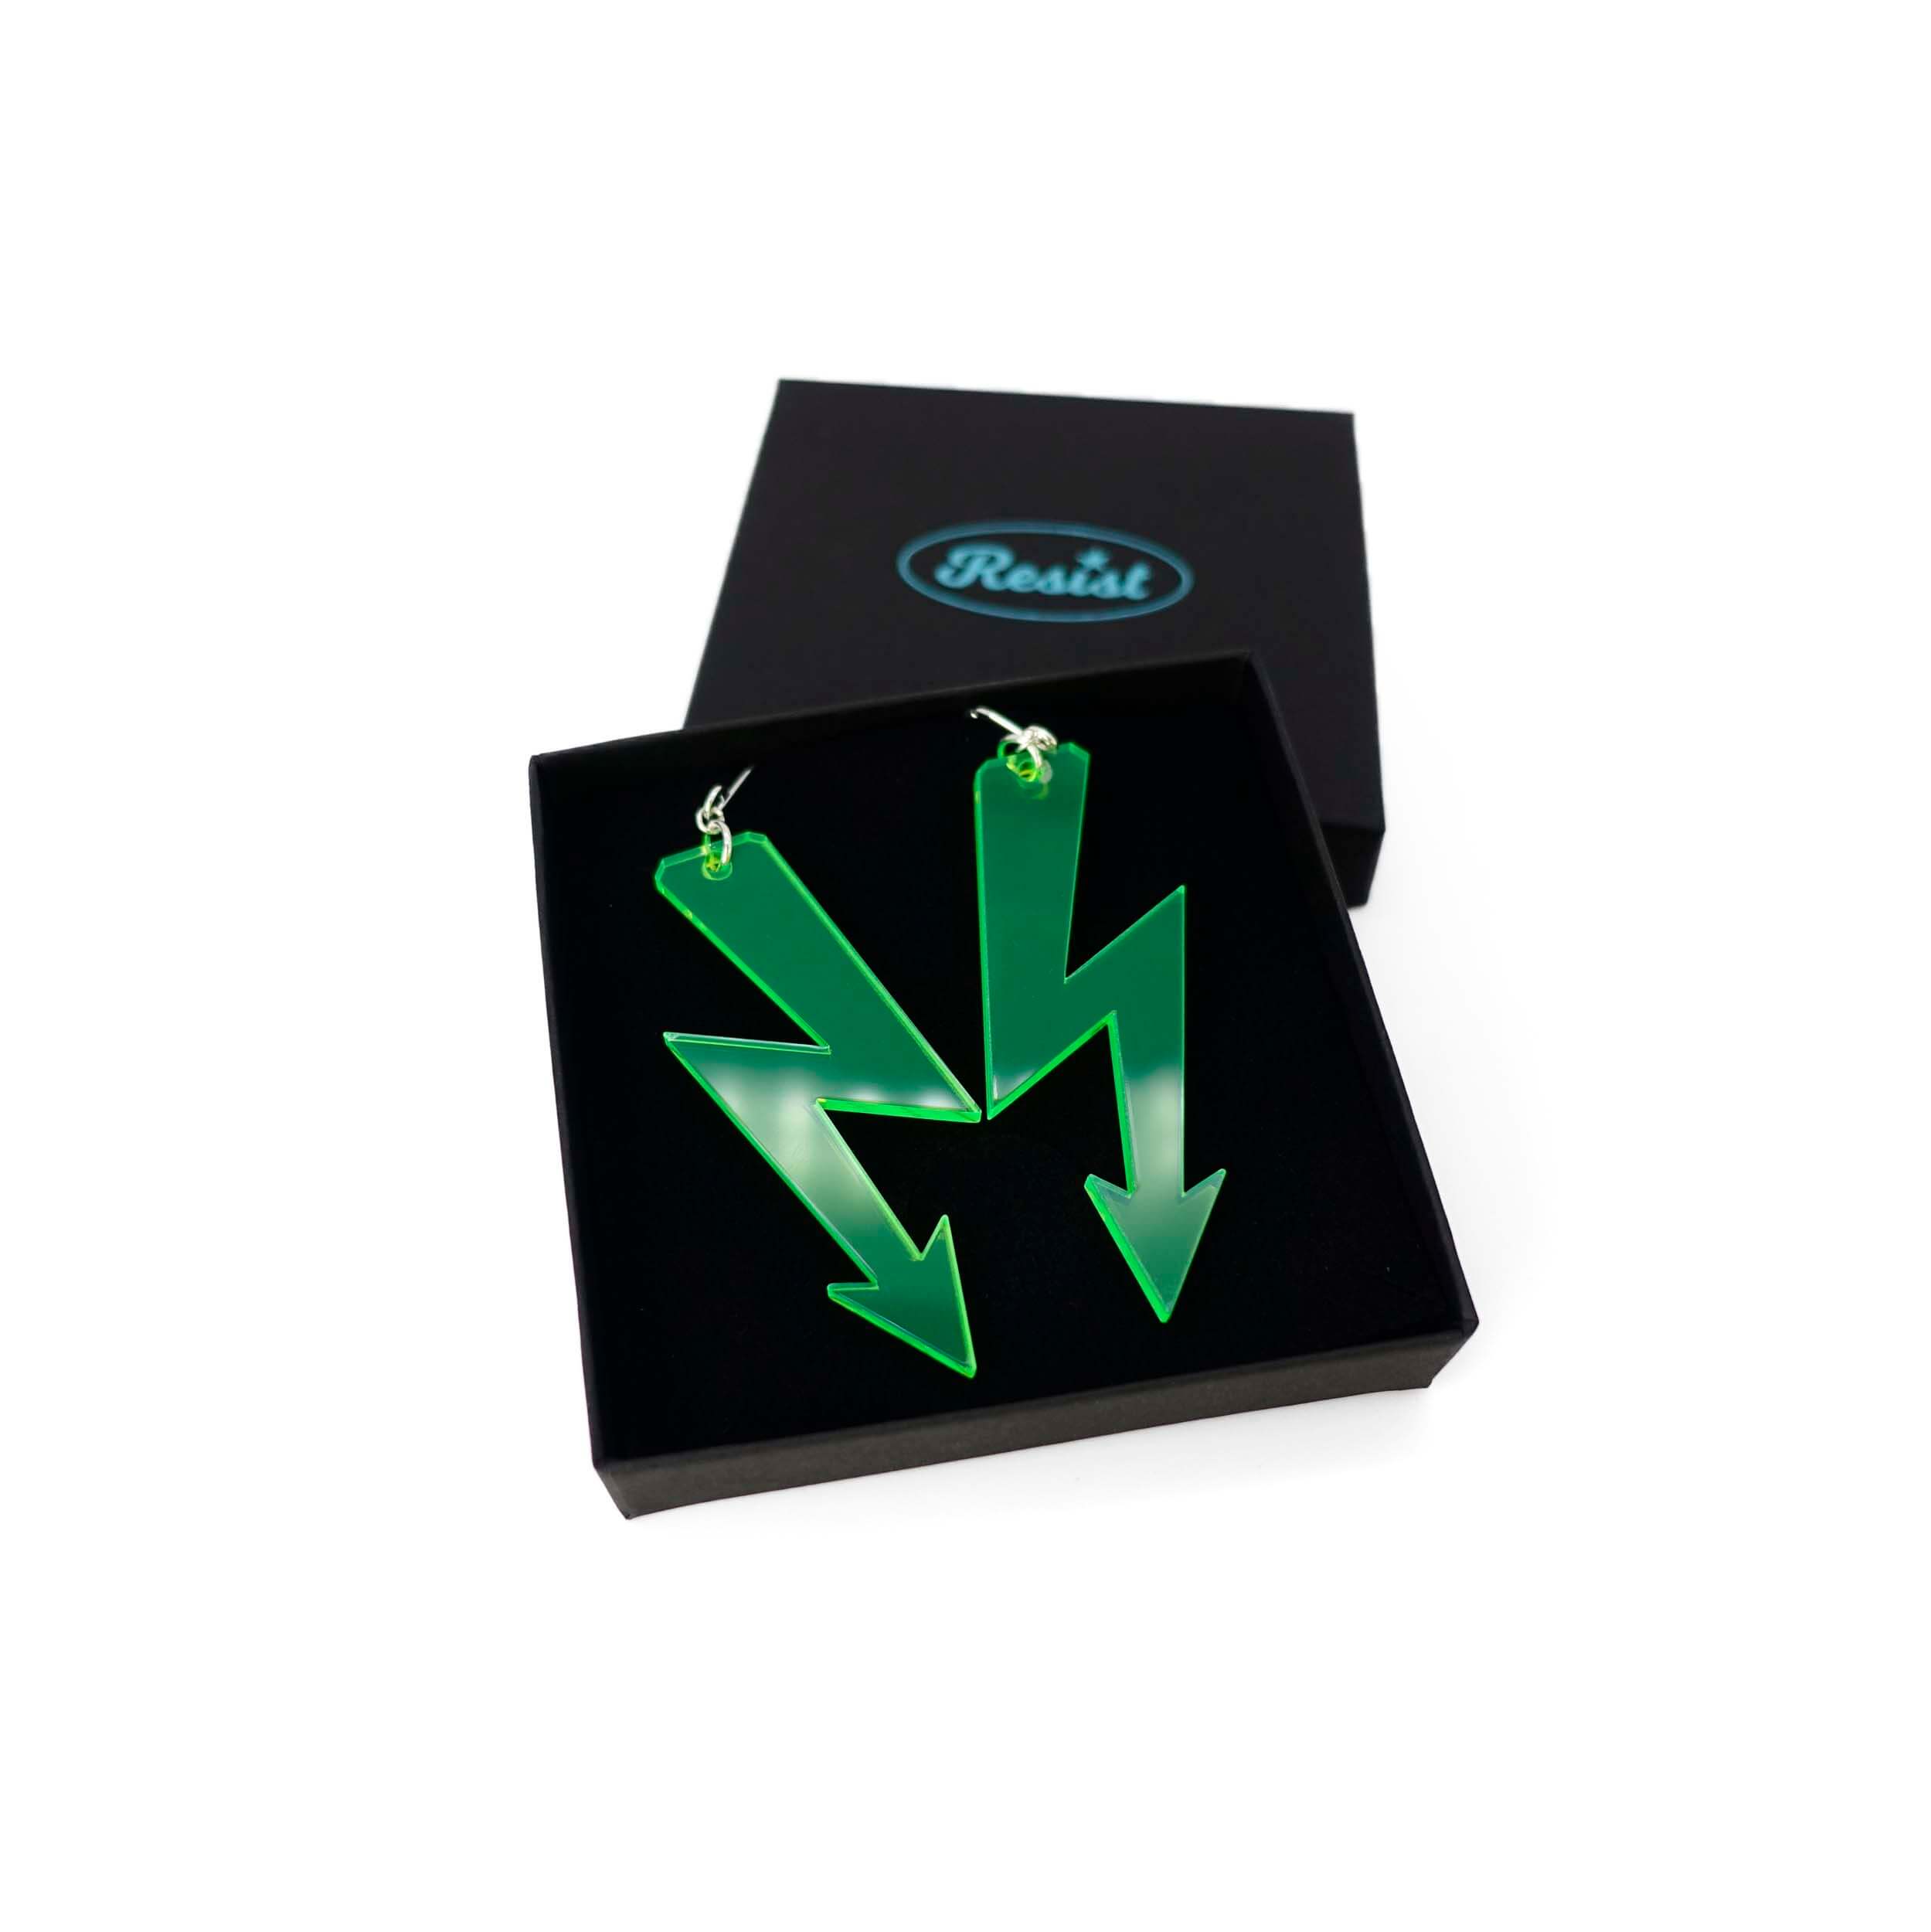 Neon lime High Voltage earrings shown in a Wear and Resist gift box. 